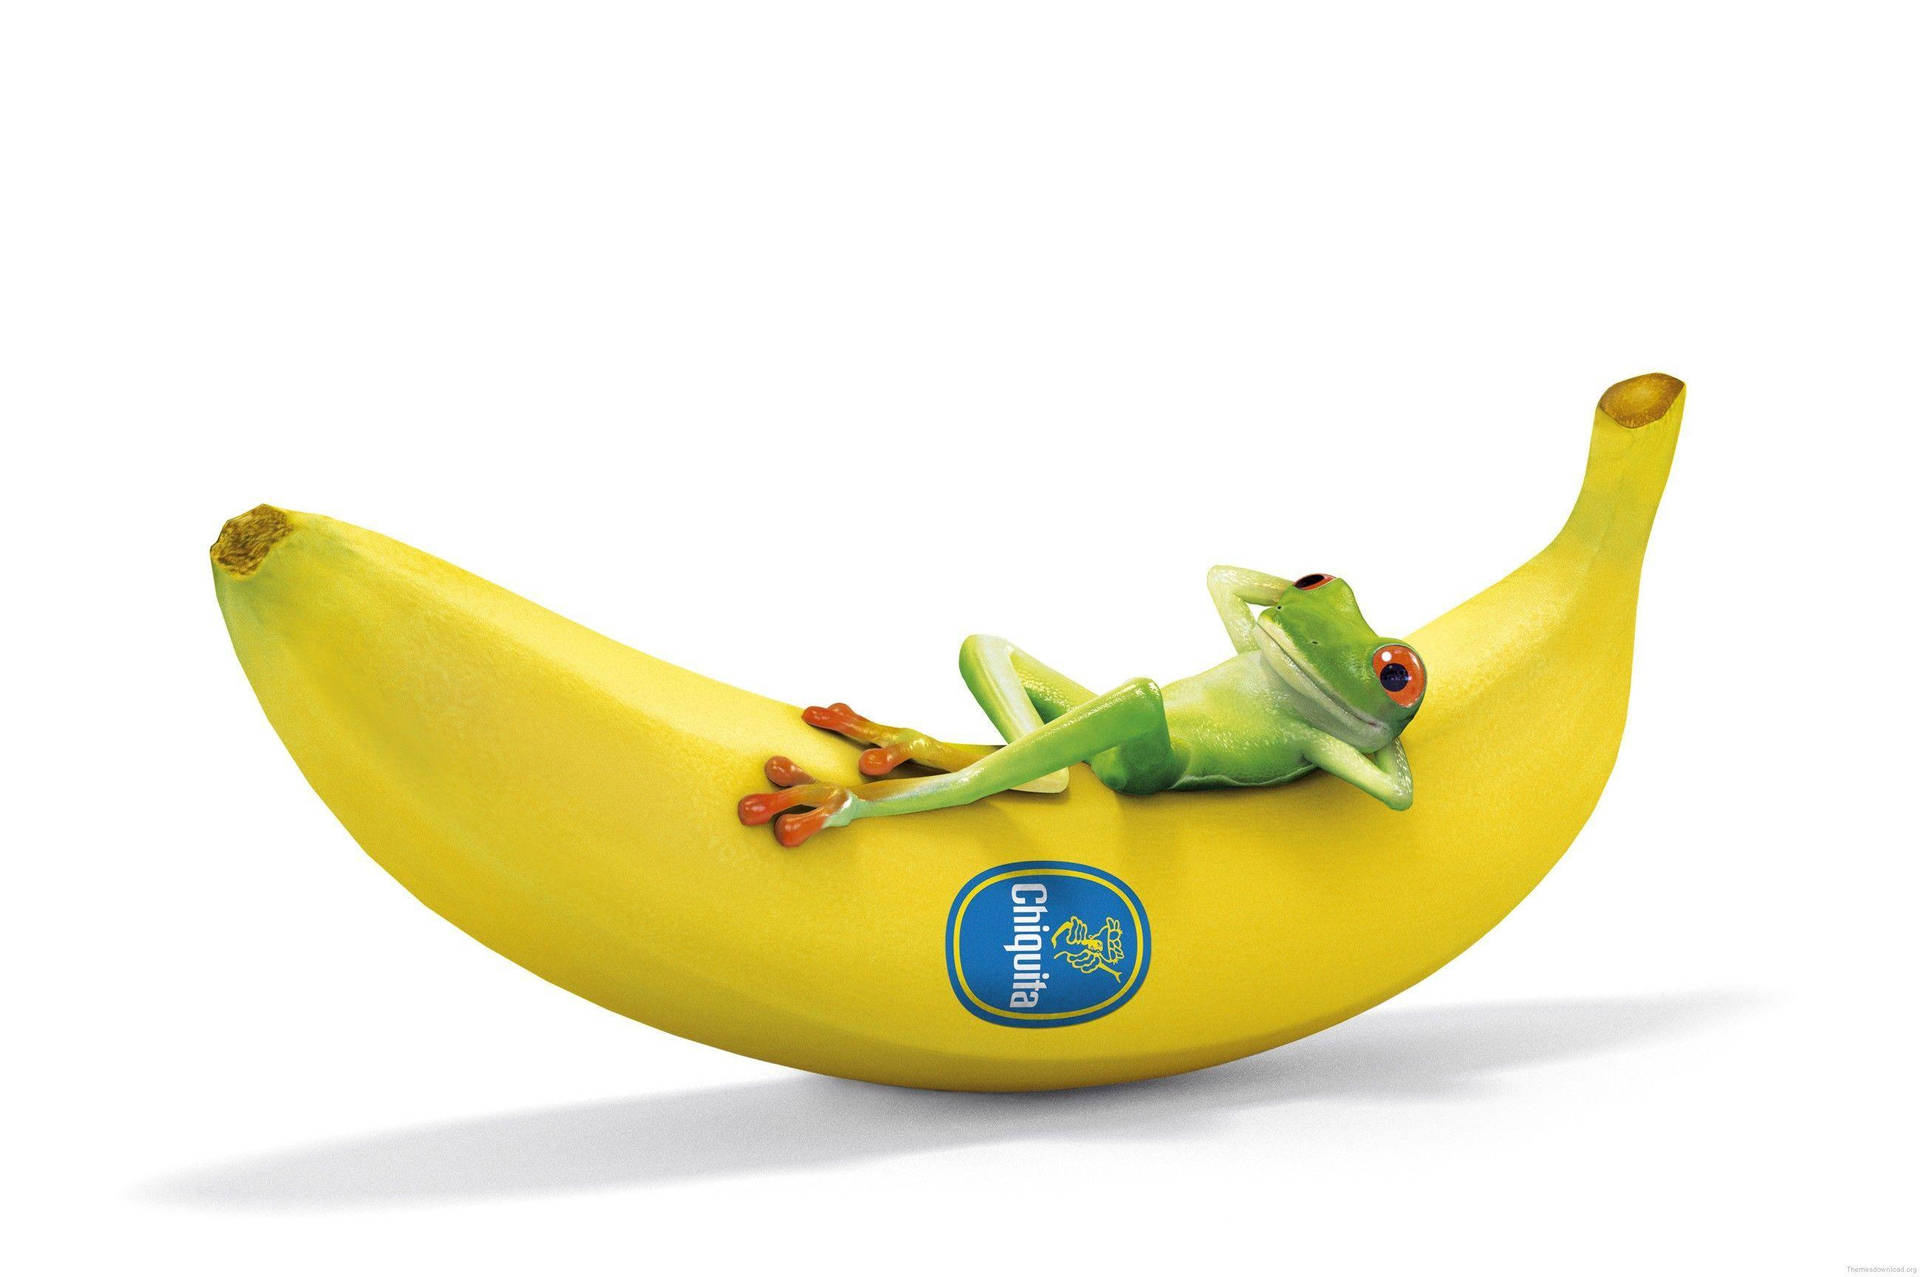 Cartoons Funny Frog Resting On A Banana Background